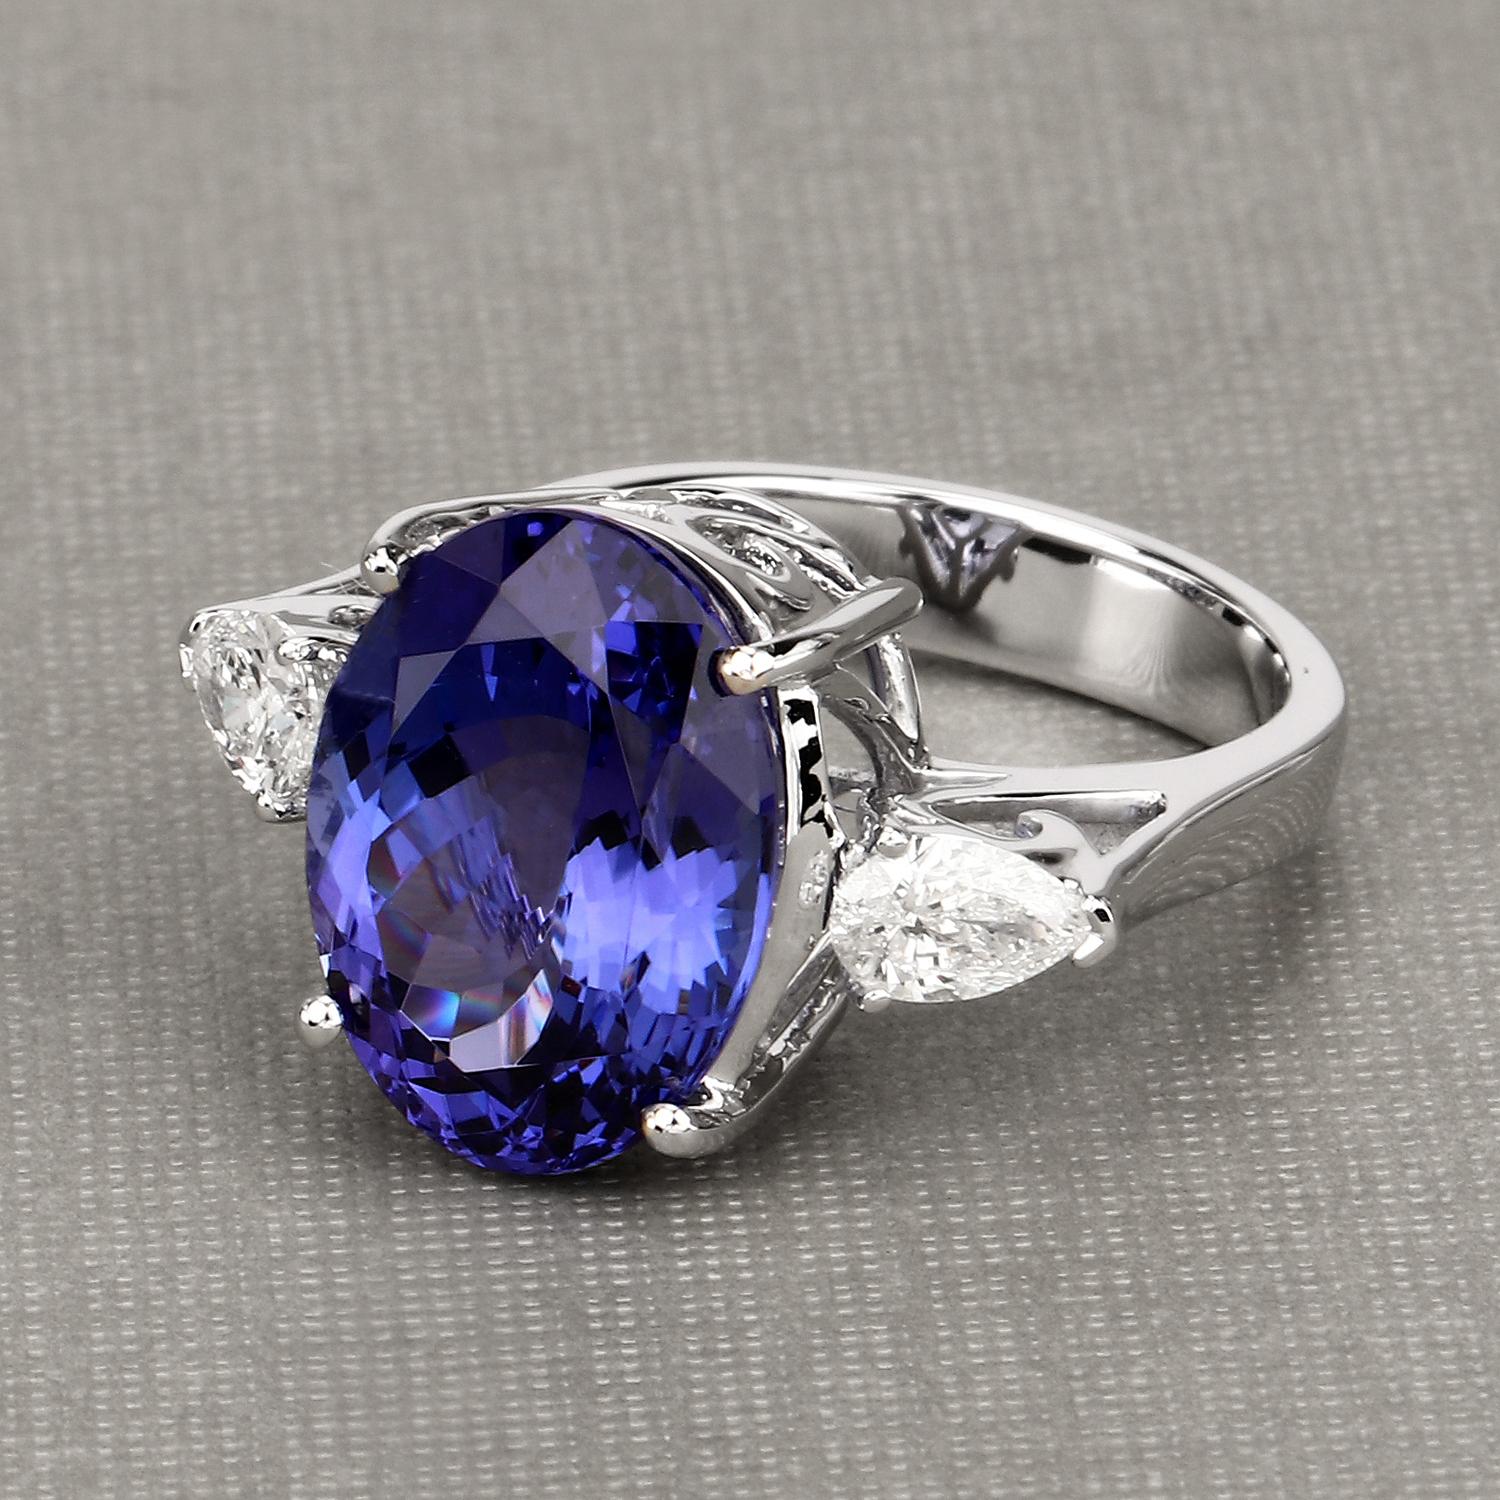 10.74 Carat Genuine Tanzanite and White Diamond 18 Karat White Gold Ring In New Condition For Sale In Great Neck, NY